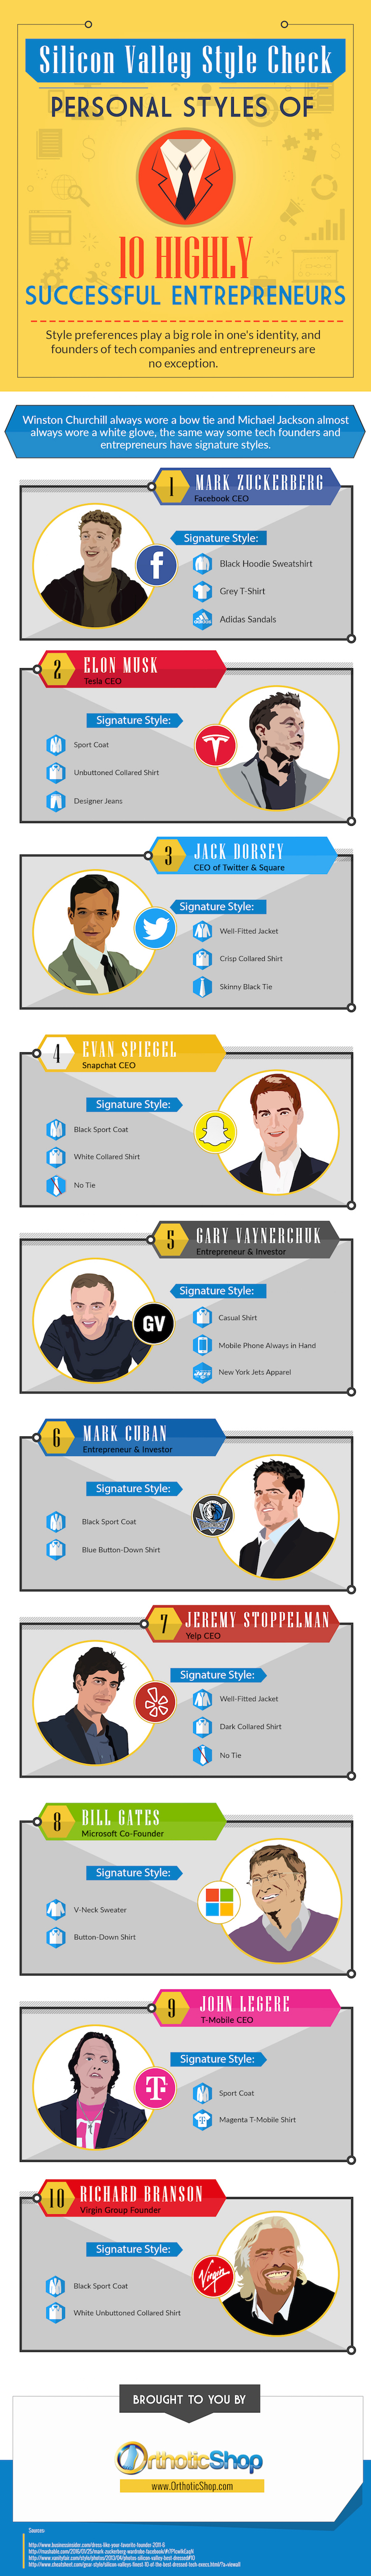 10 Personal Styles Belonging to Successful Entrepreneurs [Infographic]